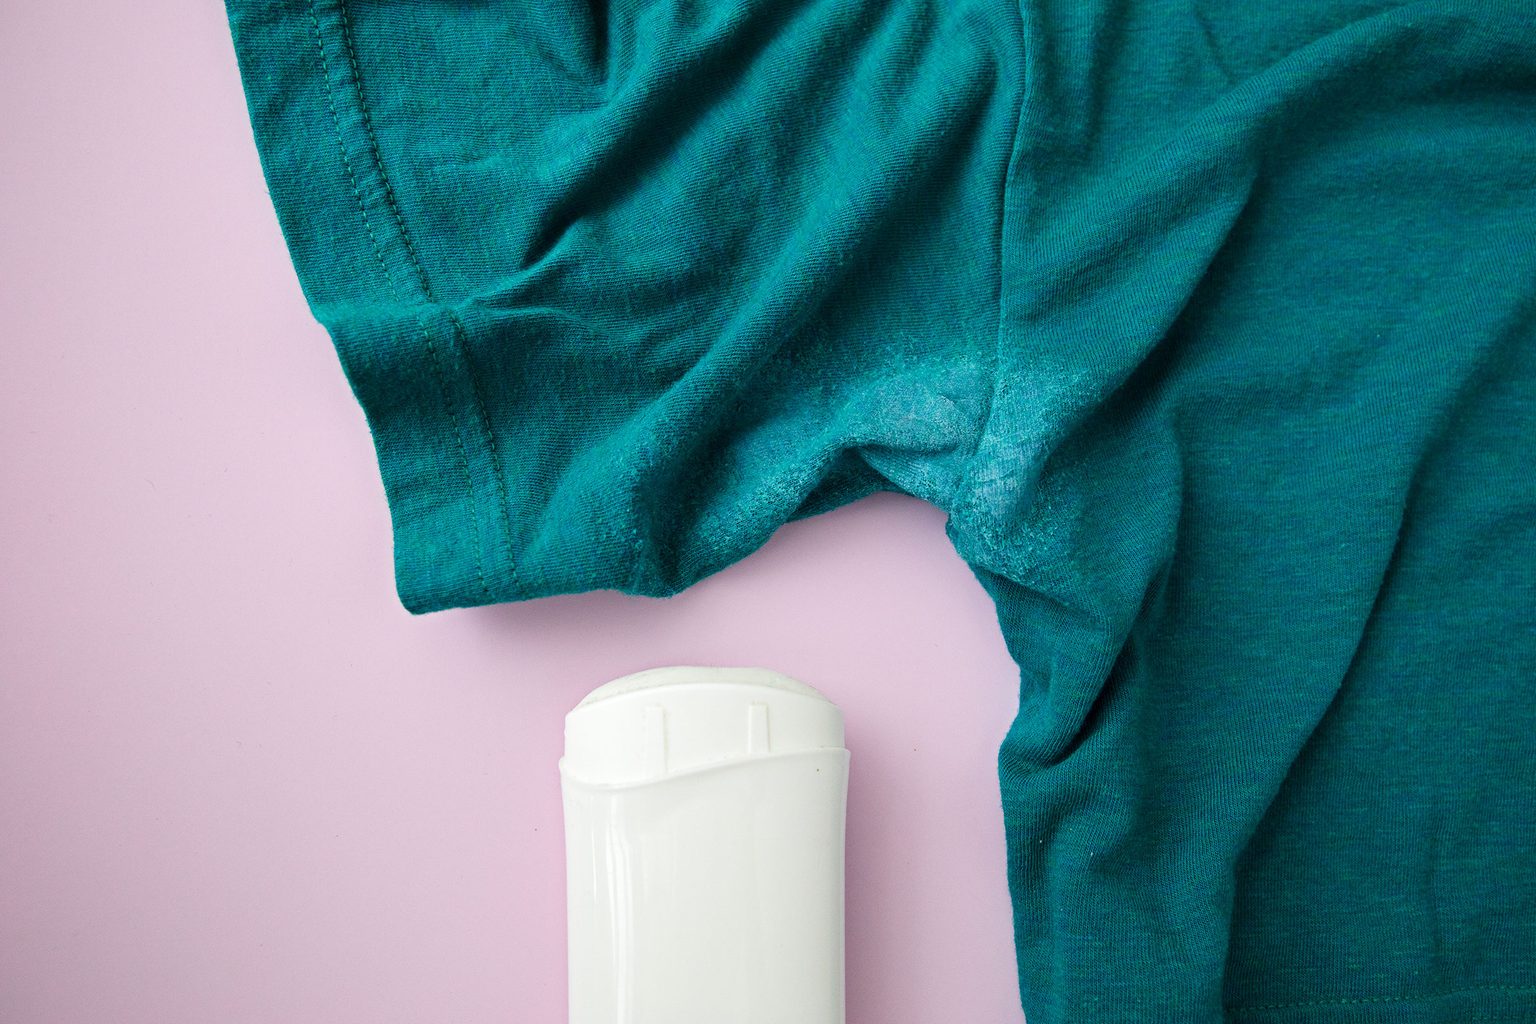 How to Get Deodorant Stains Out of Shirts — Remove Deodorant Residue